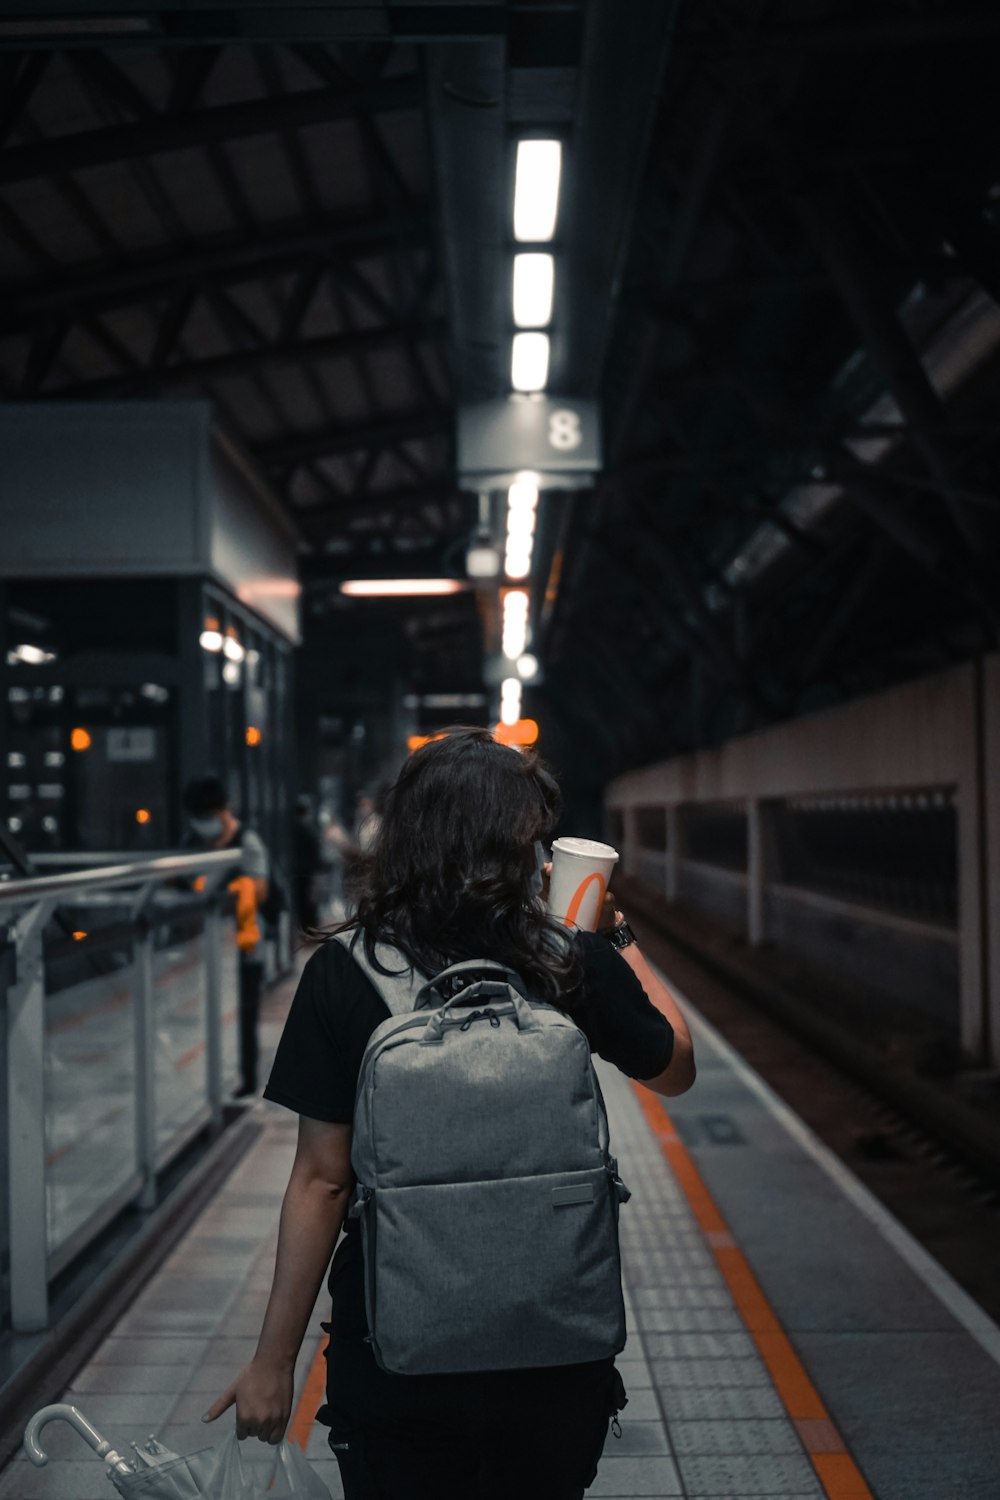 woman in black jacket and gray backpack standing on train station